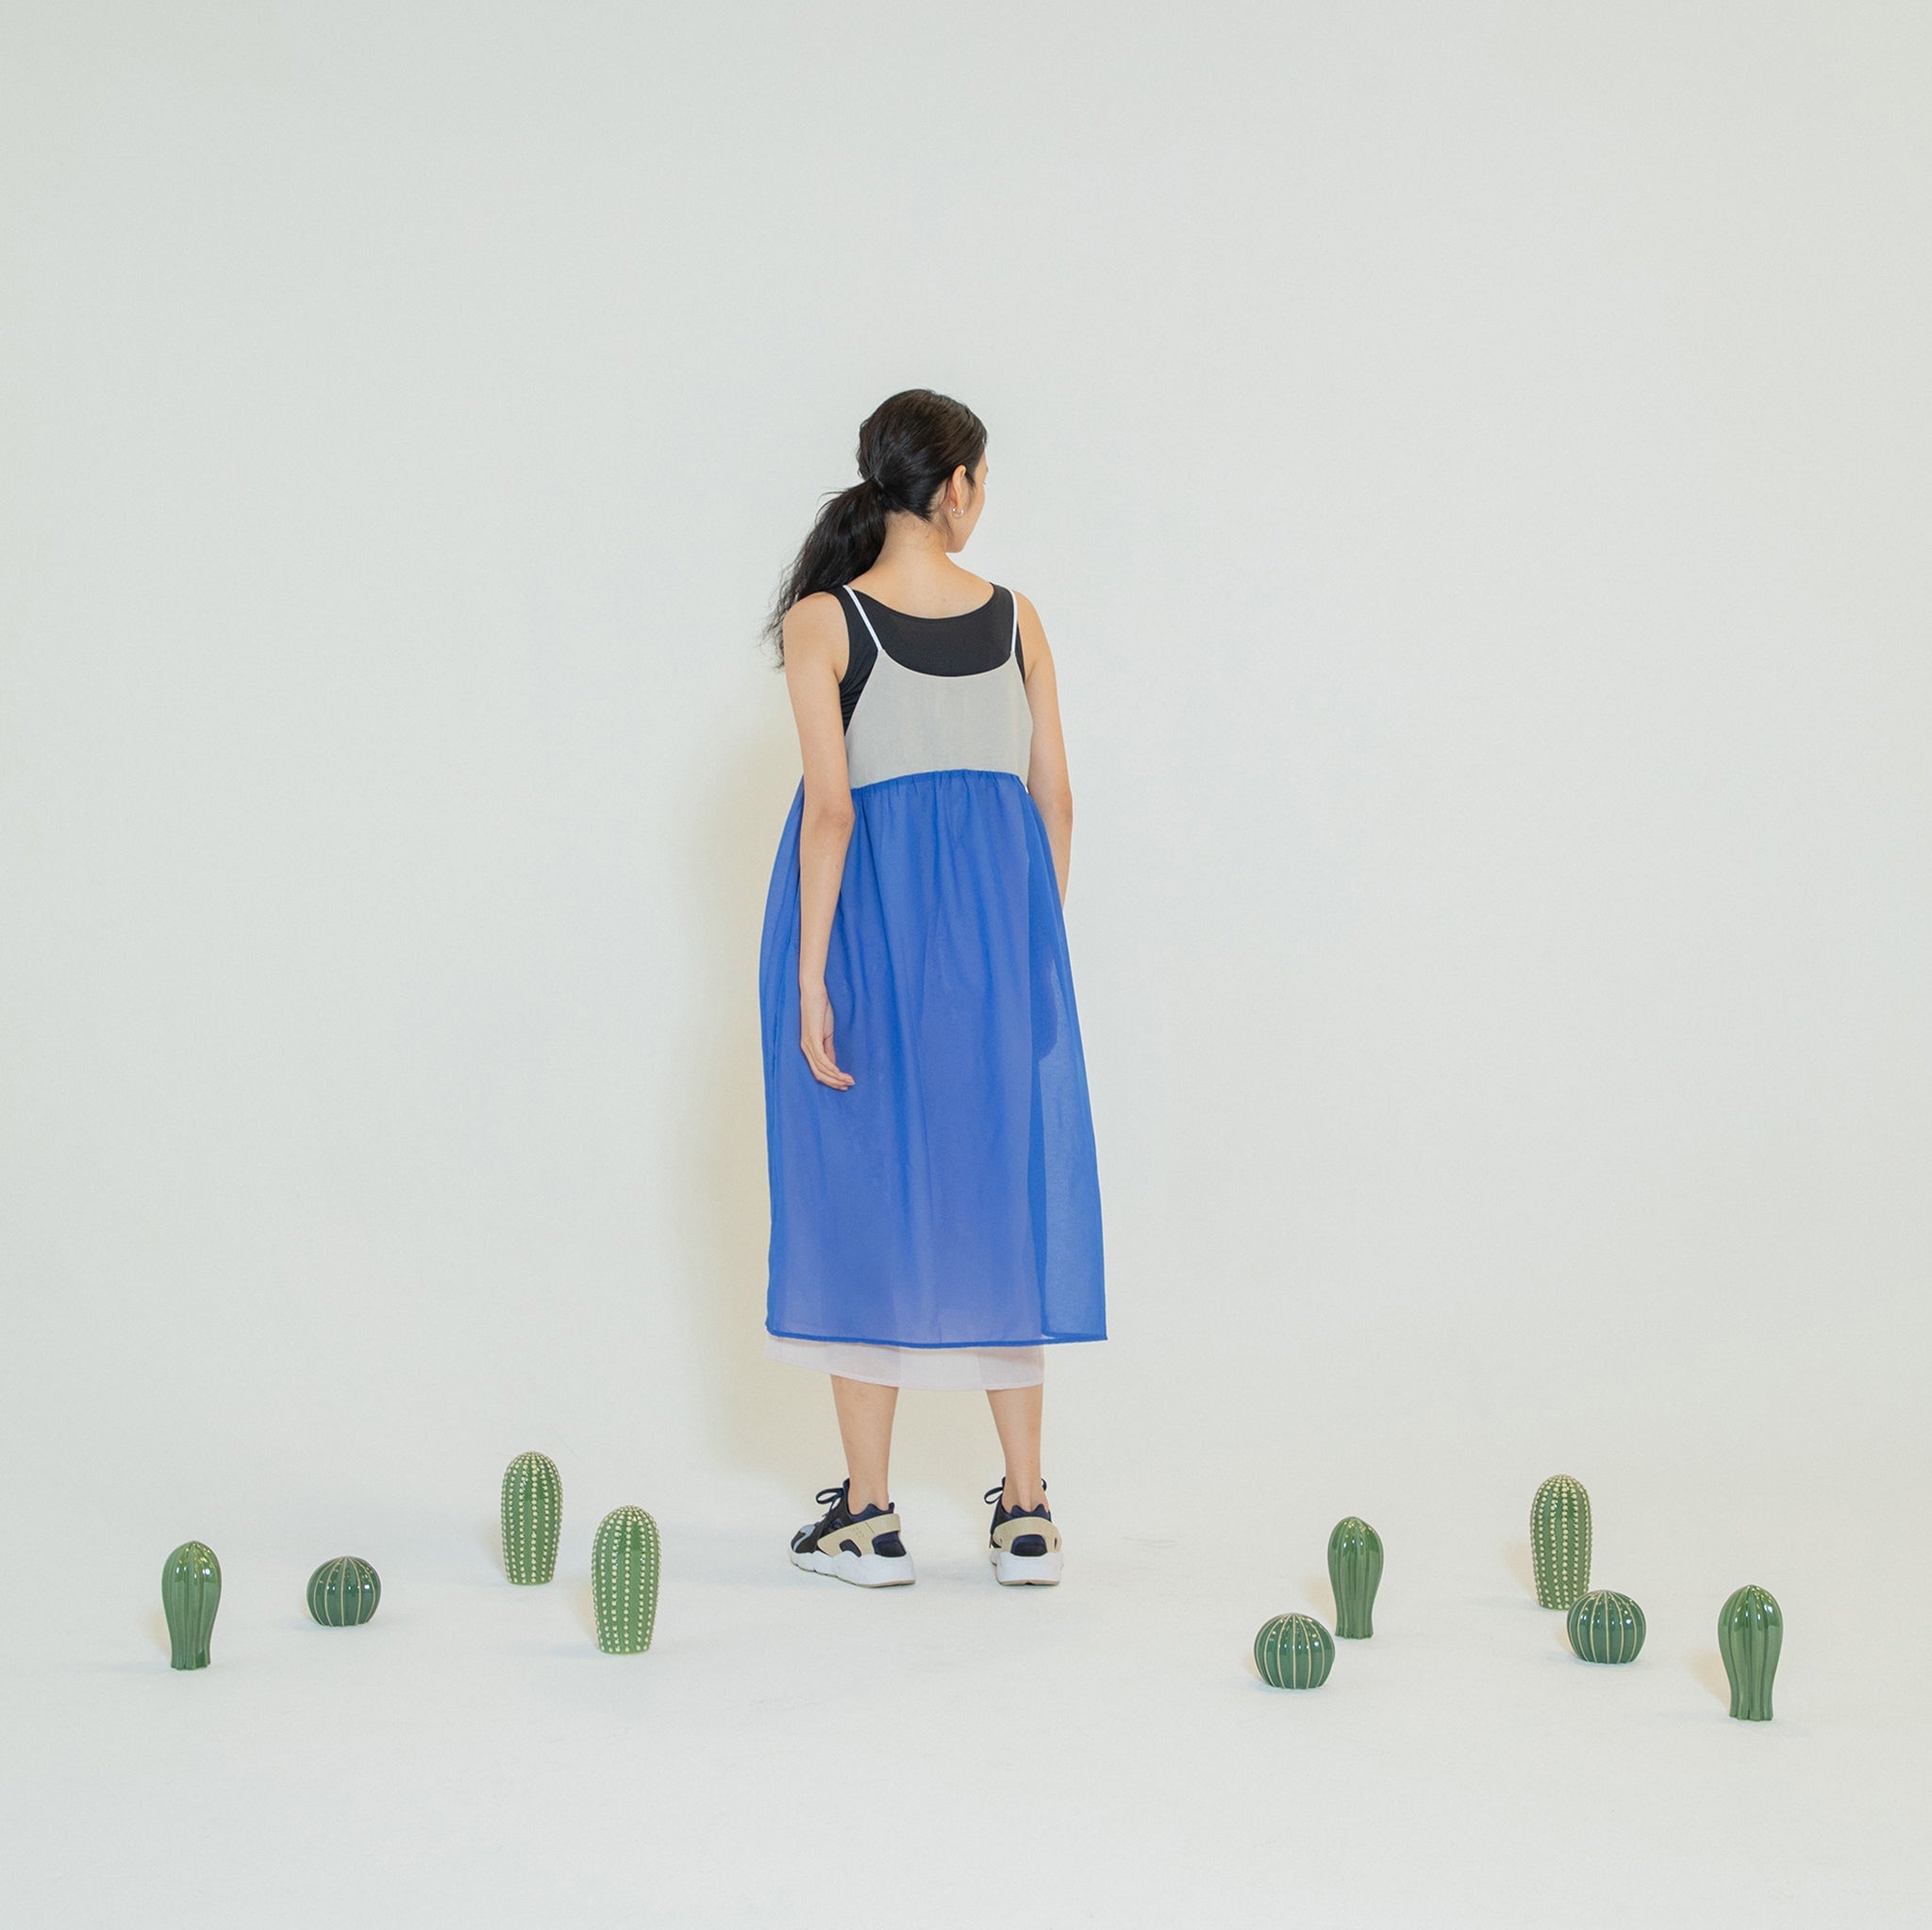 No:NV24SS-10B | Name:Color Layer Summer Dress | Color:Blue【NEYVOR_ネイバー】【入荷予定アイテム・入荷連絡可能】